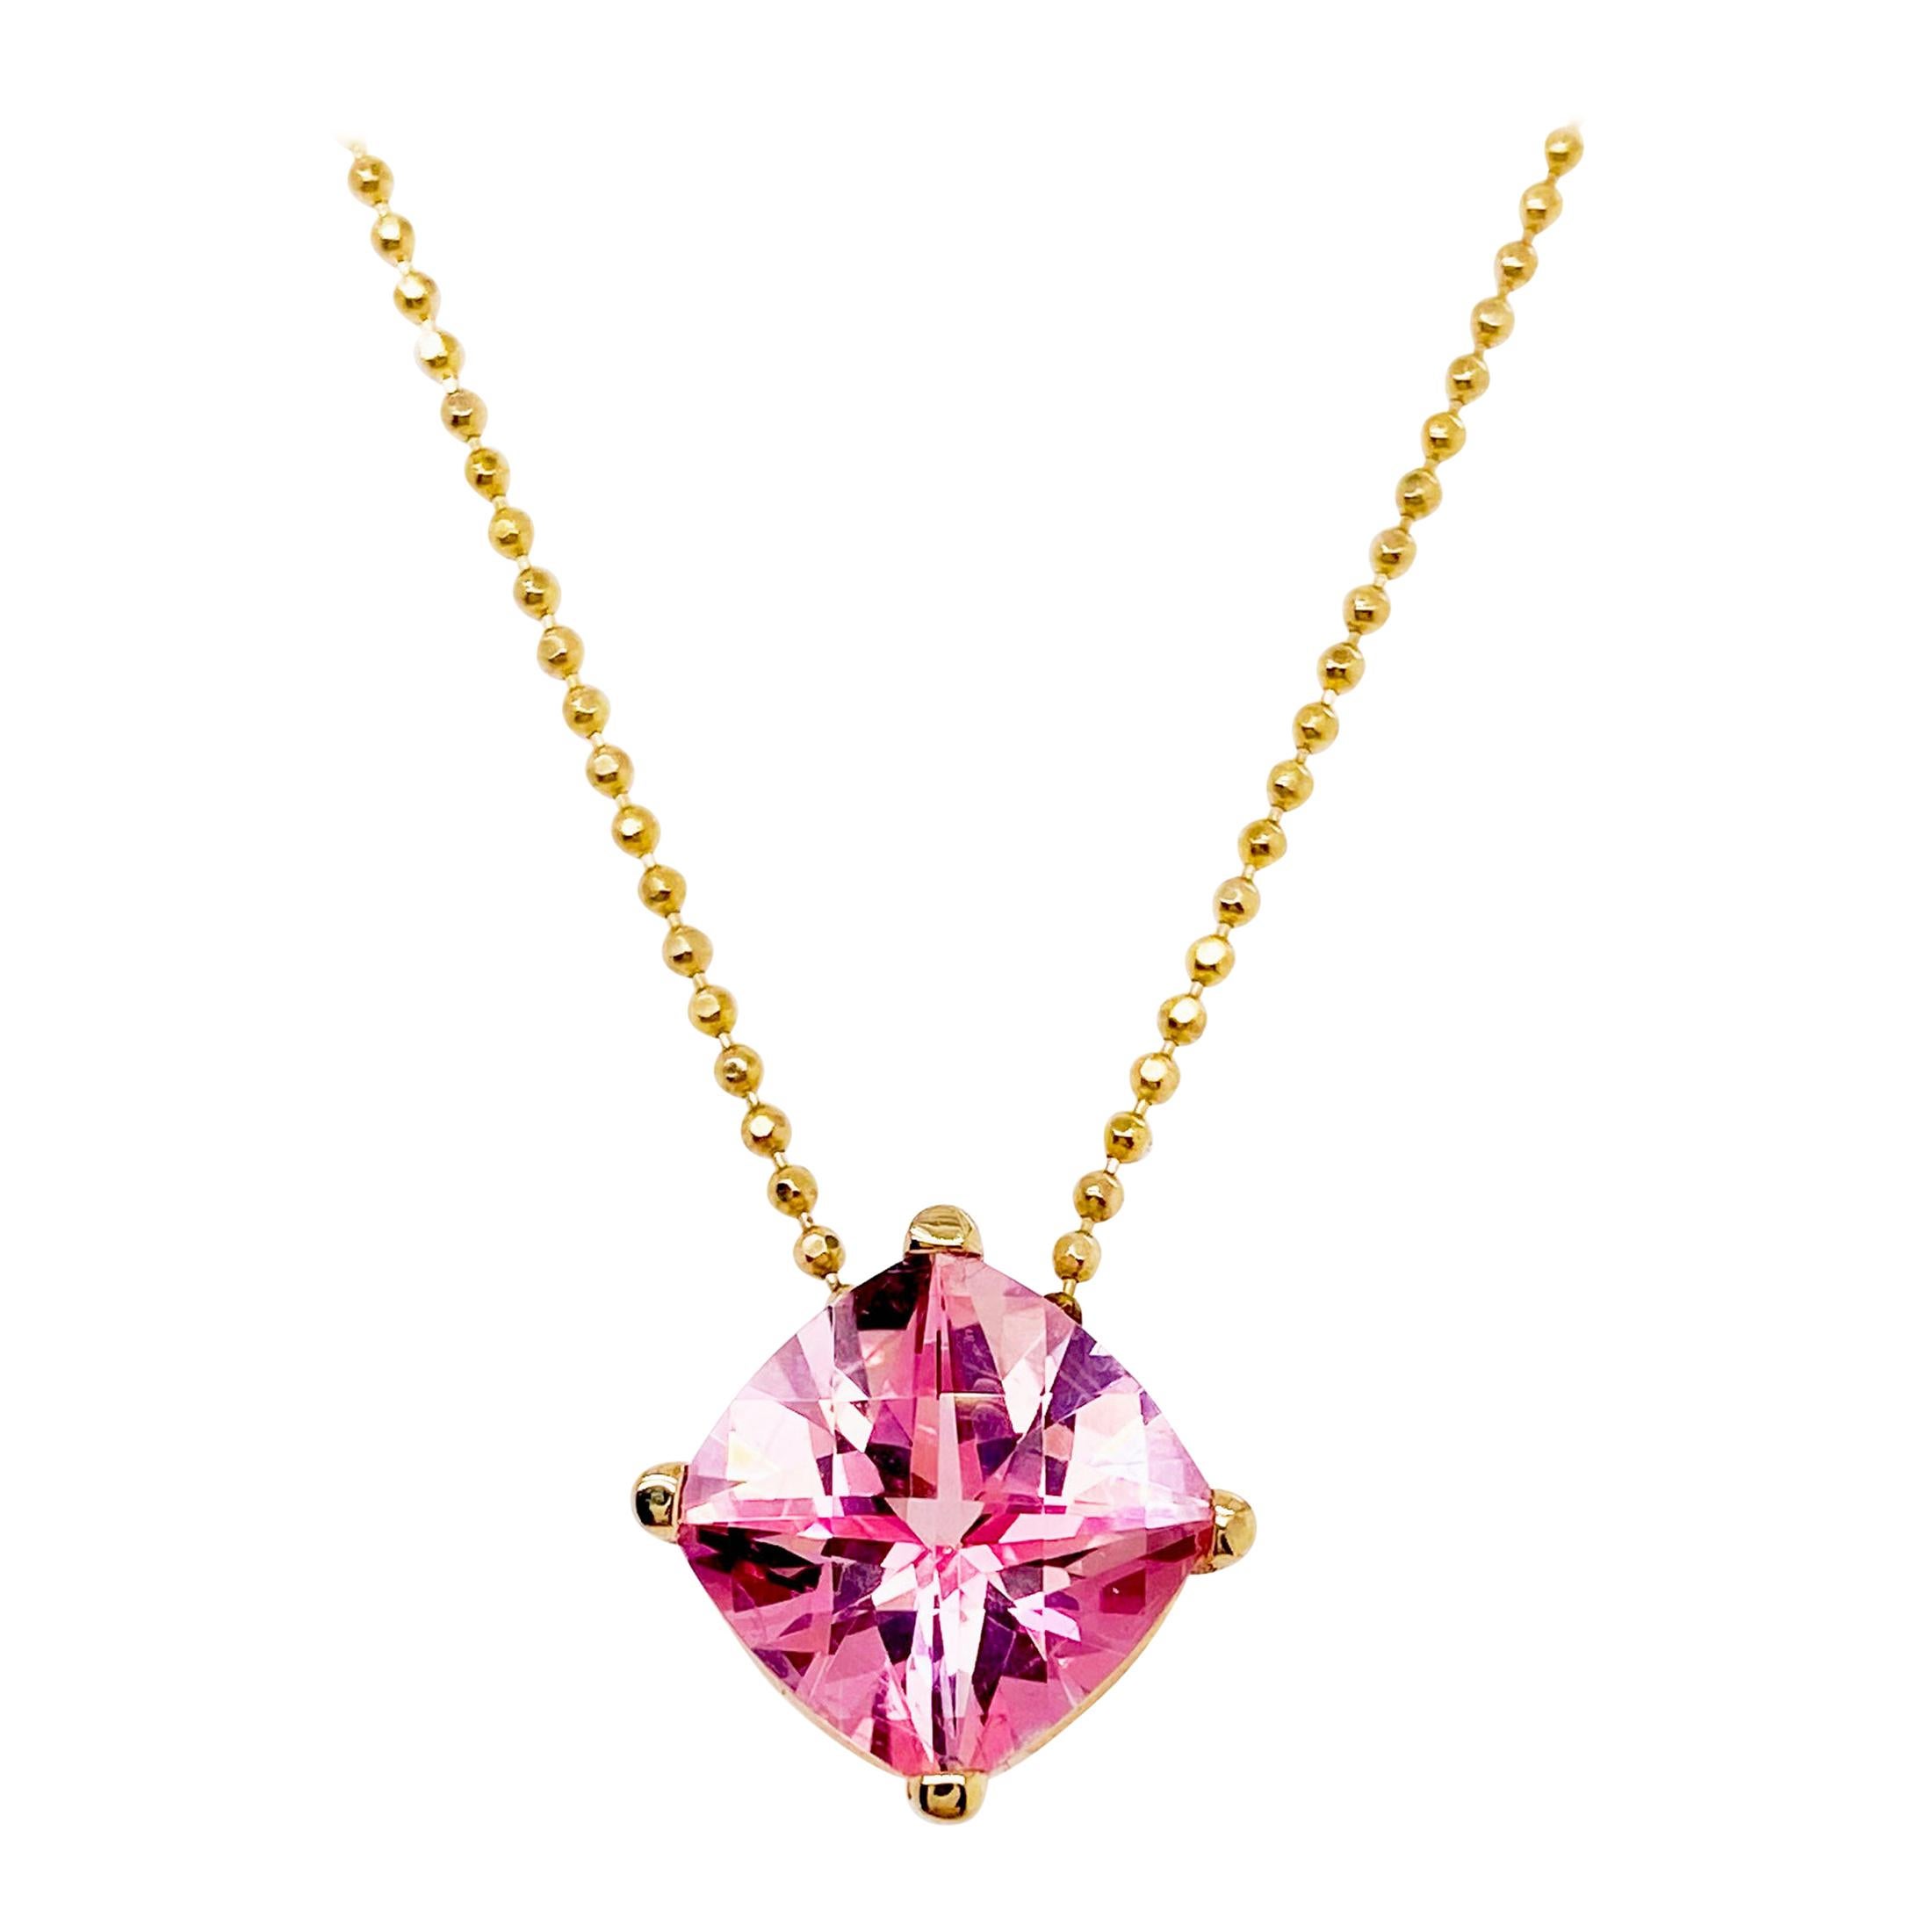 Pink Topaz Cushion Cut Gemstone with Yellow Gold Beaded Chain, Natural Genuine